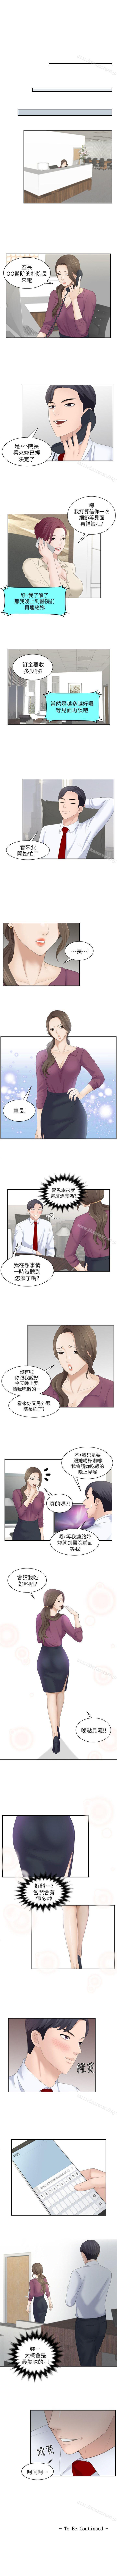 Amateur Porn 熟女的滋味 1-26 Whipping - Page 8